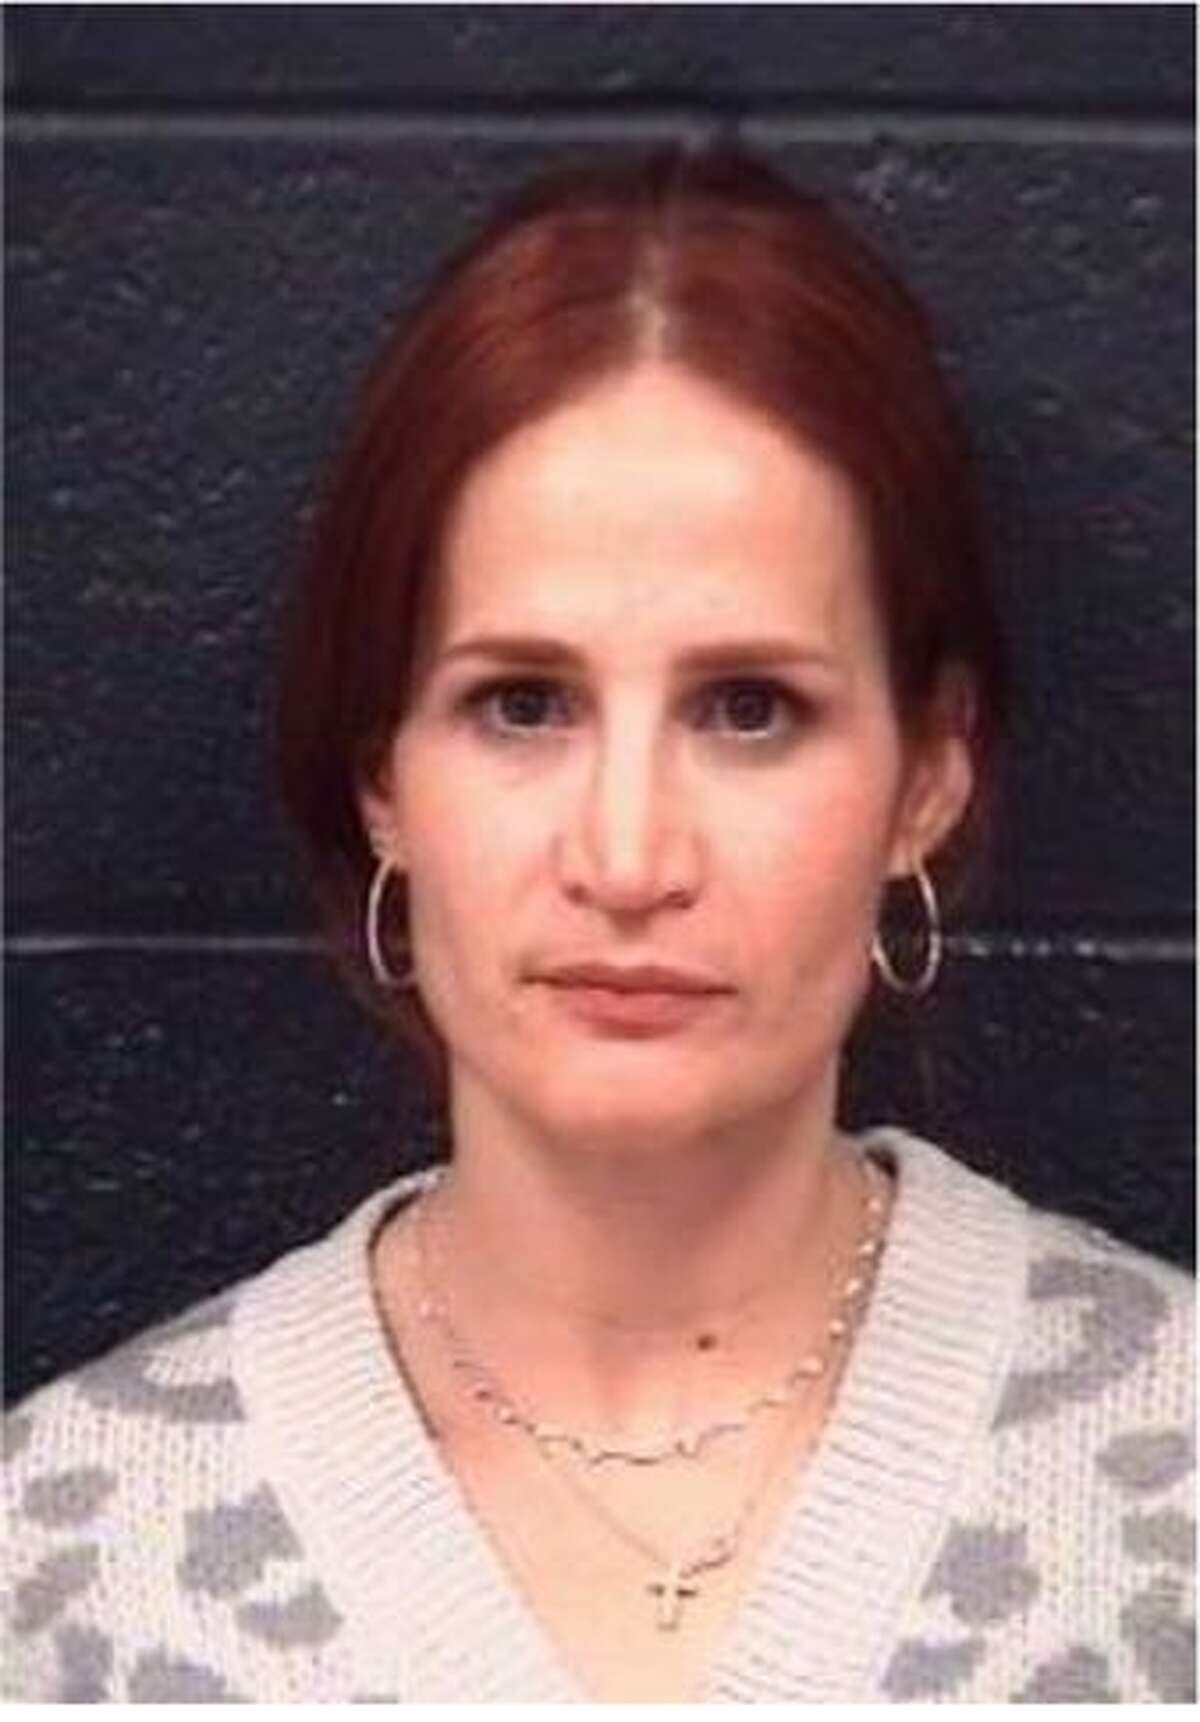 Martha Veronica Riddle was charged with driving while intoxicated.